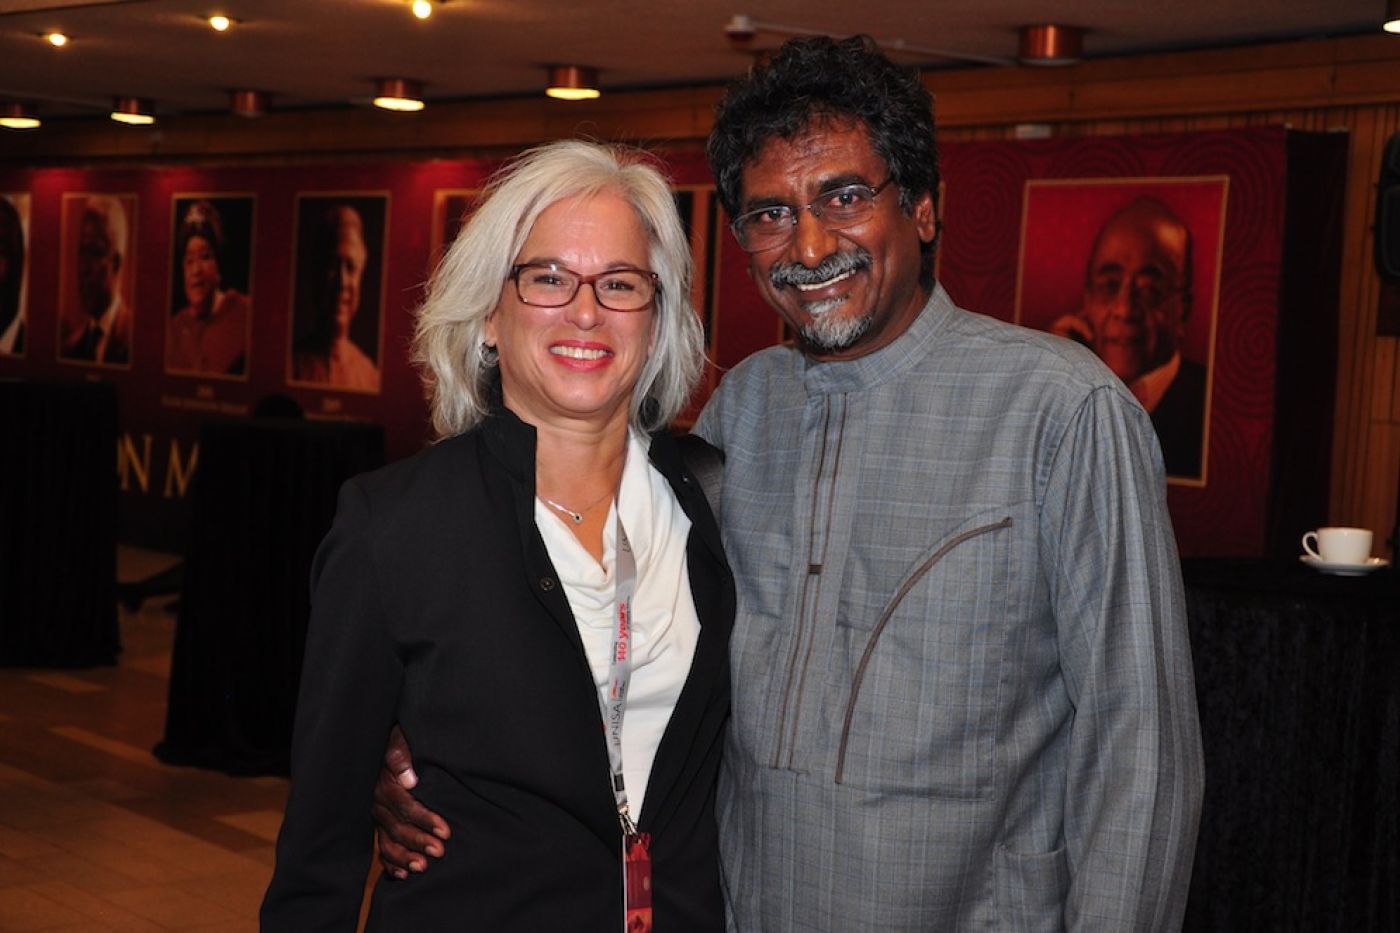 Jay Naidoo, 11th Nelson Mandela Annual Lecture